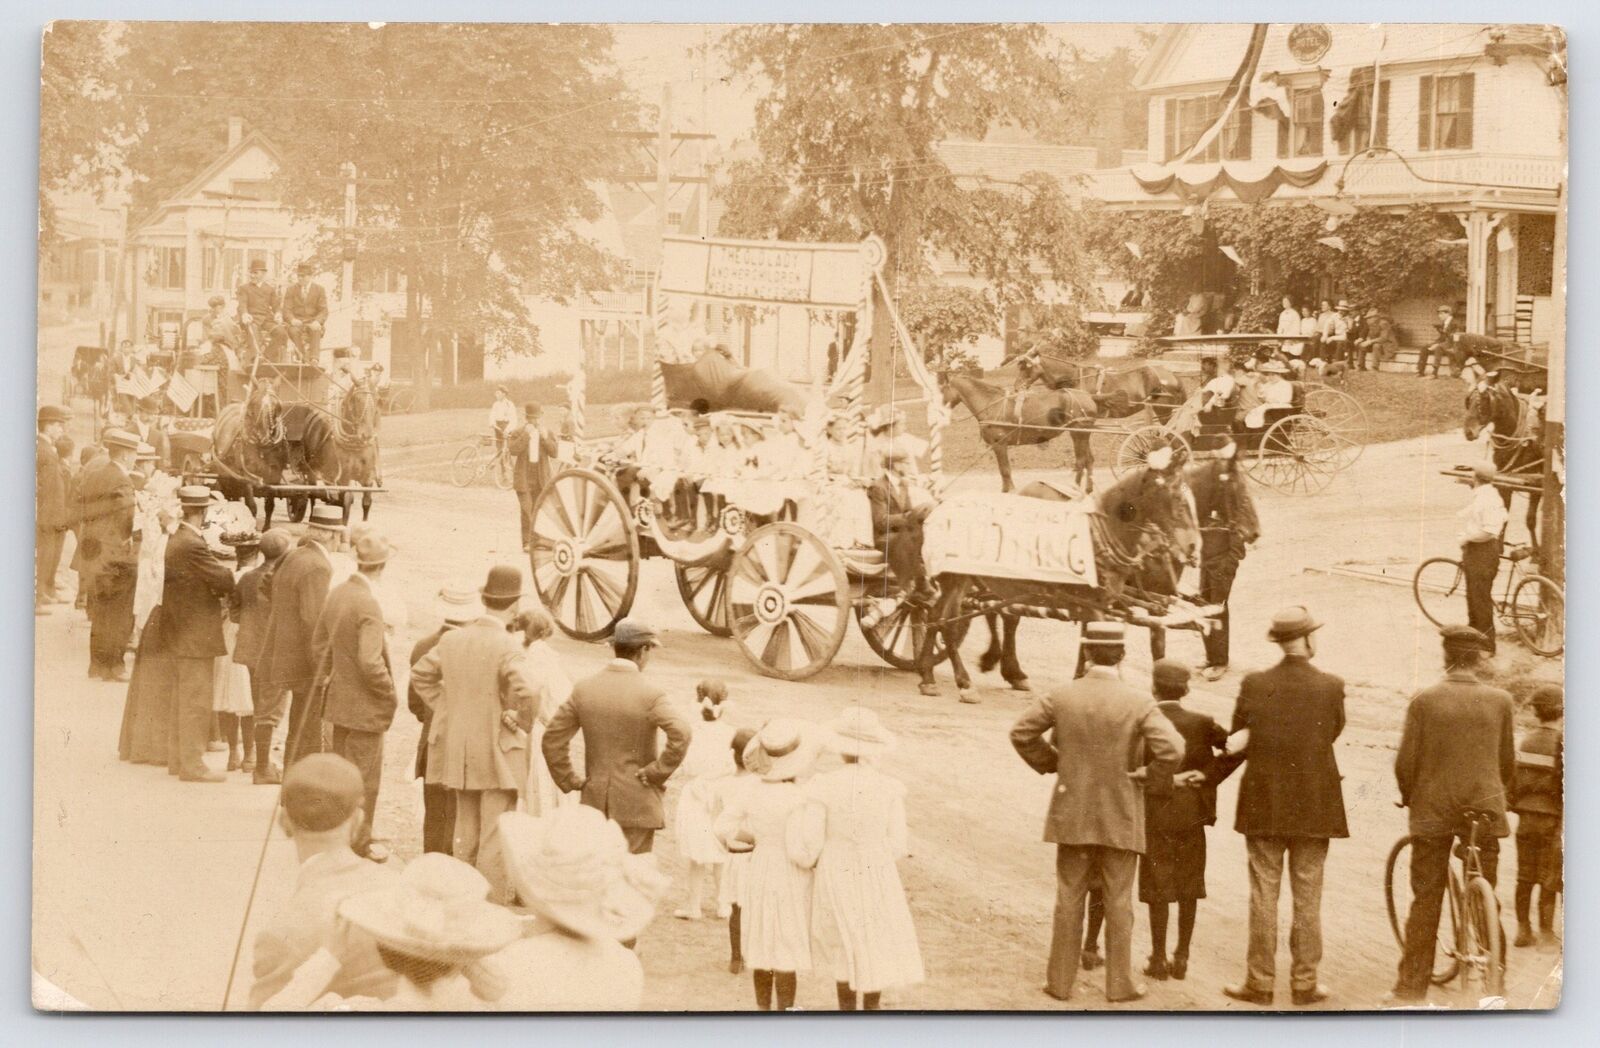 Greenville~Gainey Shoes Float~Parade Past Columbian Hotel~Duclos Manchester RPPC